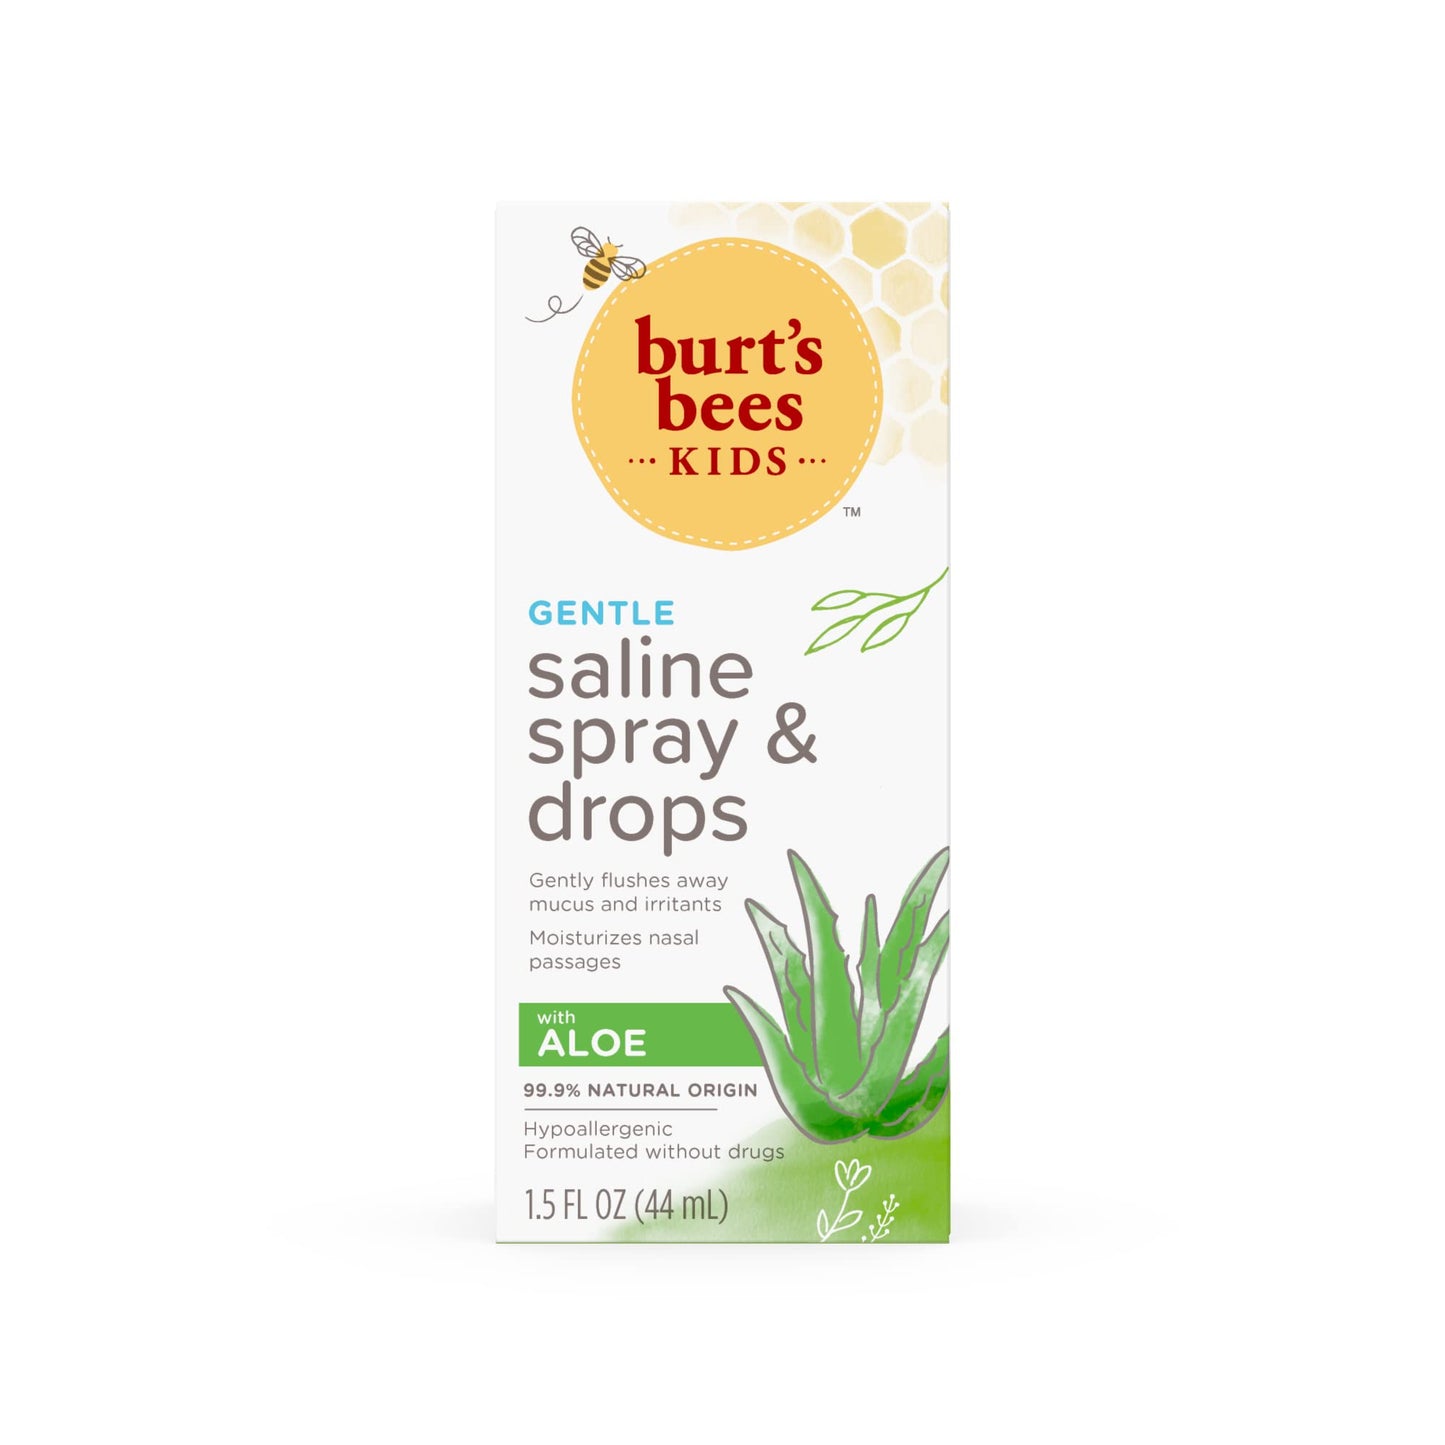 Burt's Bees Bees Kids Saline Spray and Drops, Hypoallergenic, Moisturizing, Flushes Away Mucus for Ages 3 Months and Up, 1.5 Fl Oz (Pack of 1)